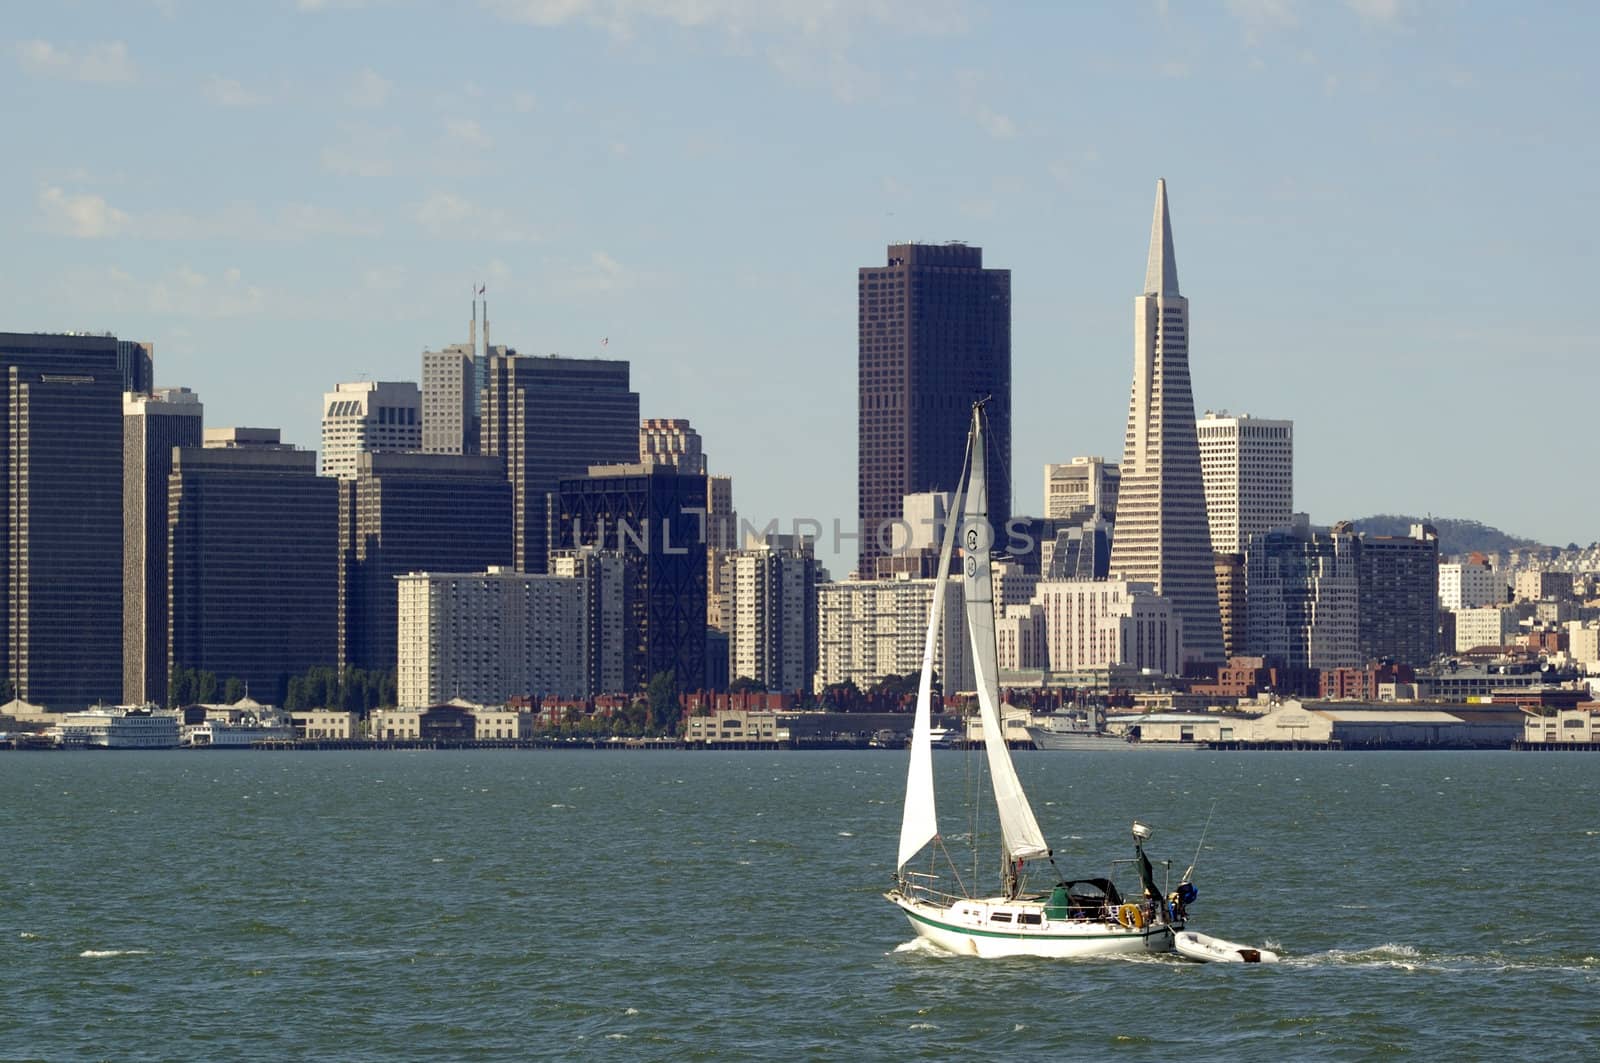 City of San Francisco with a yatch sailing across the bay